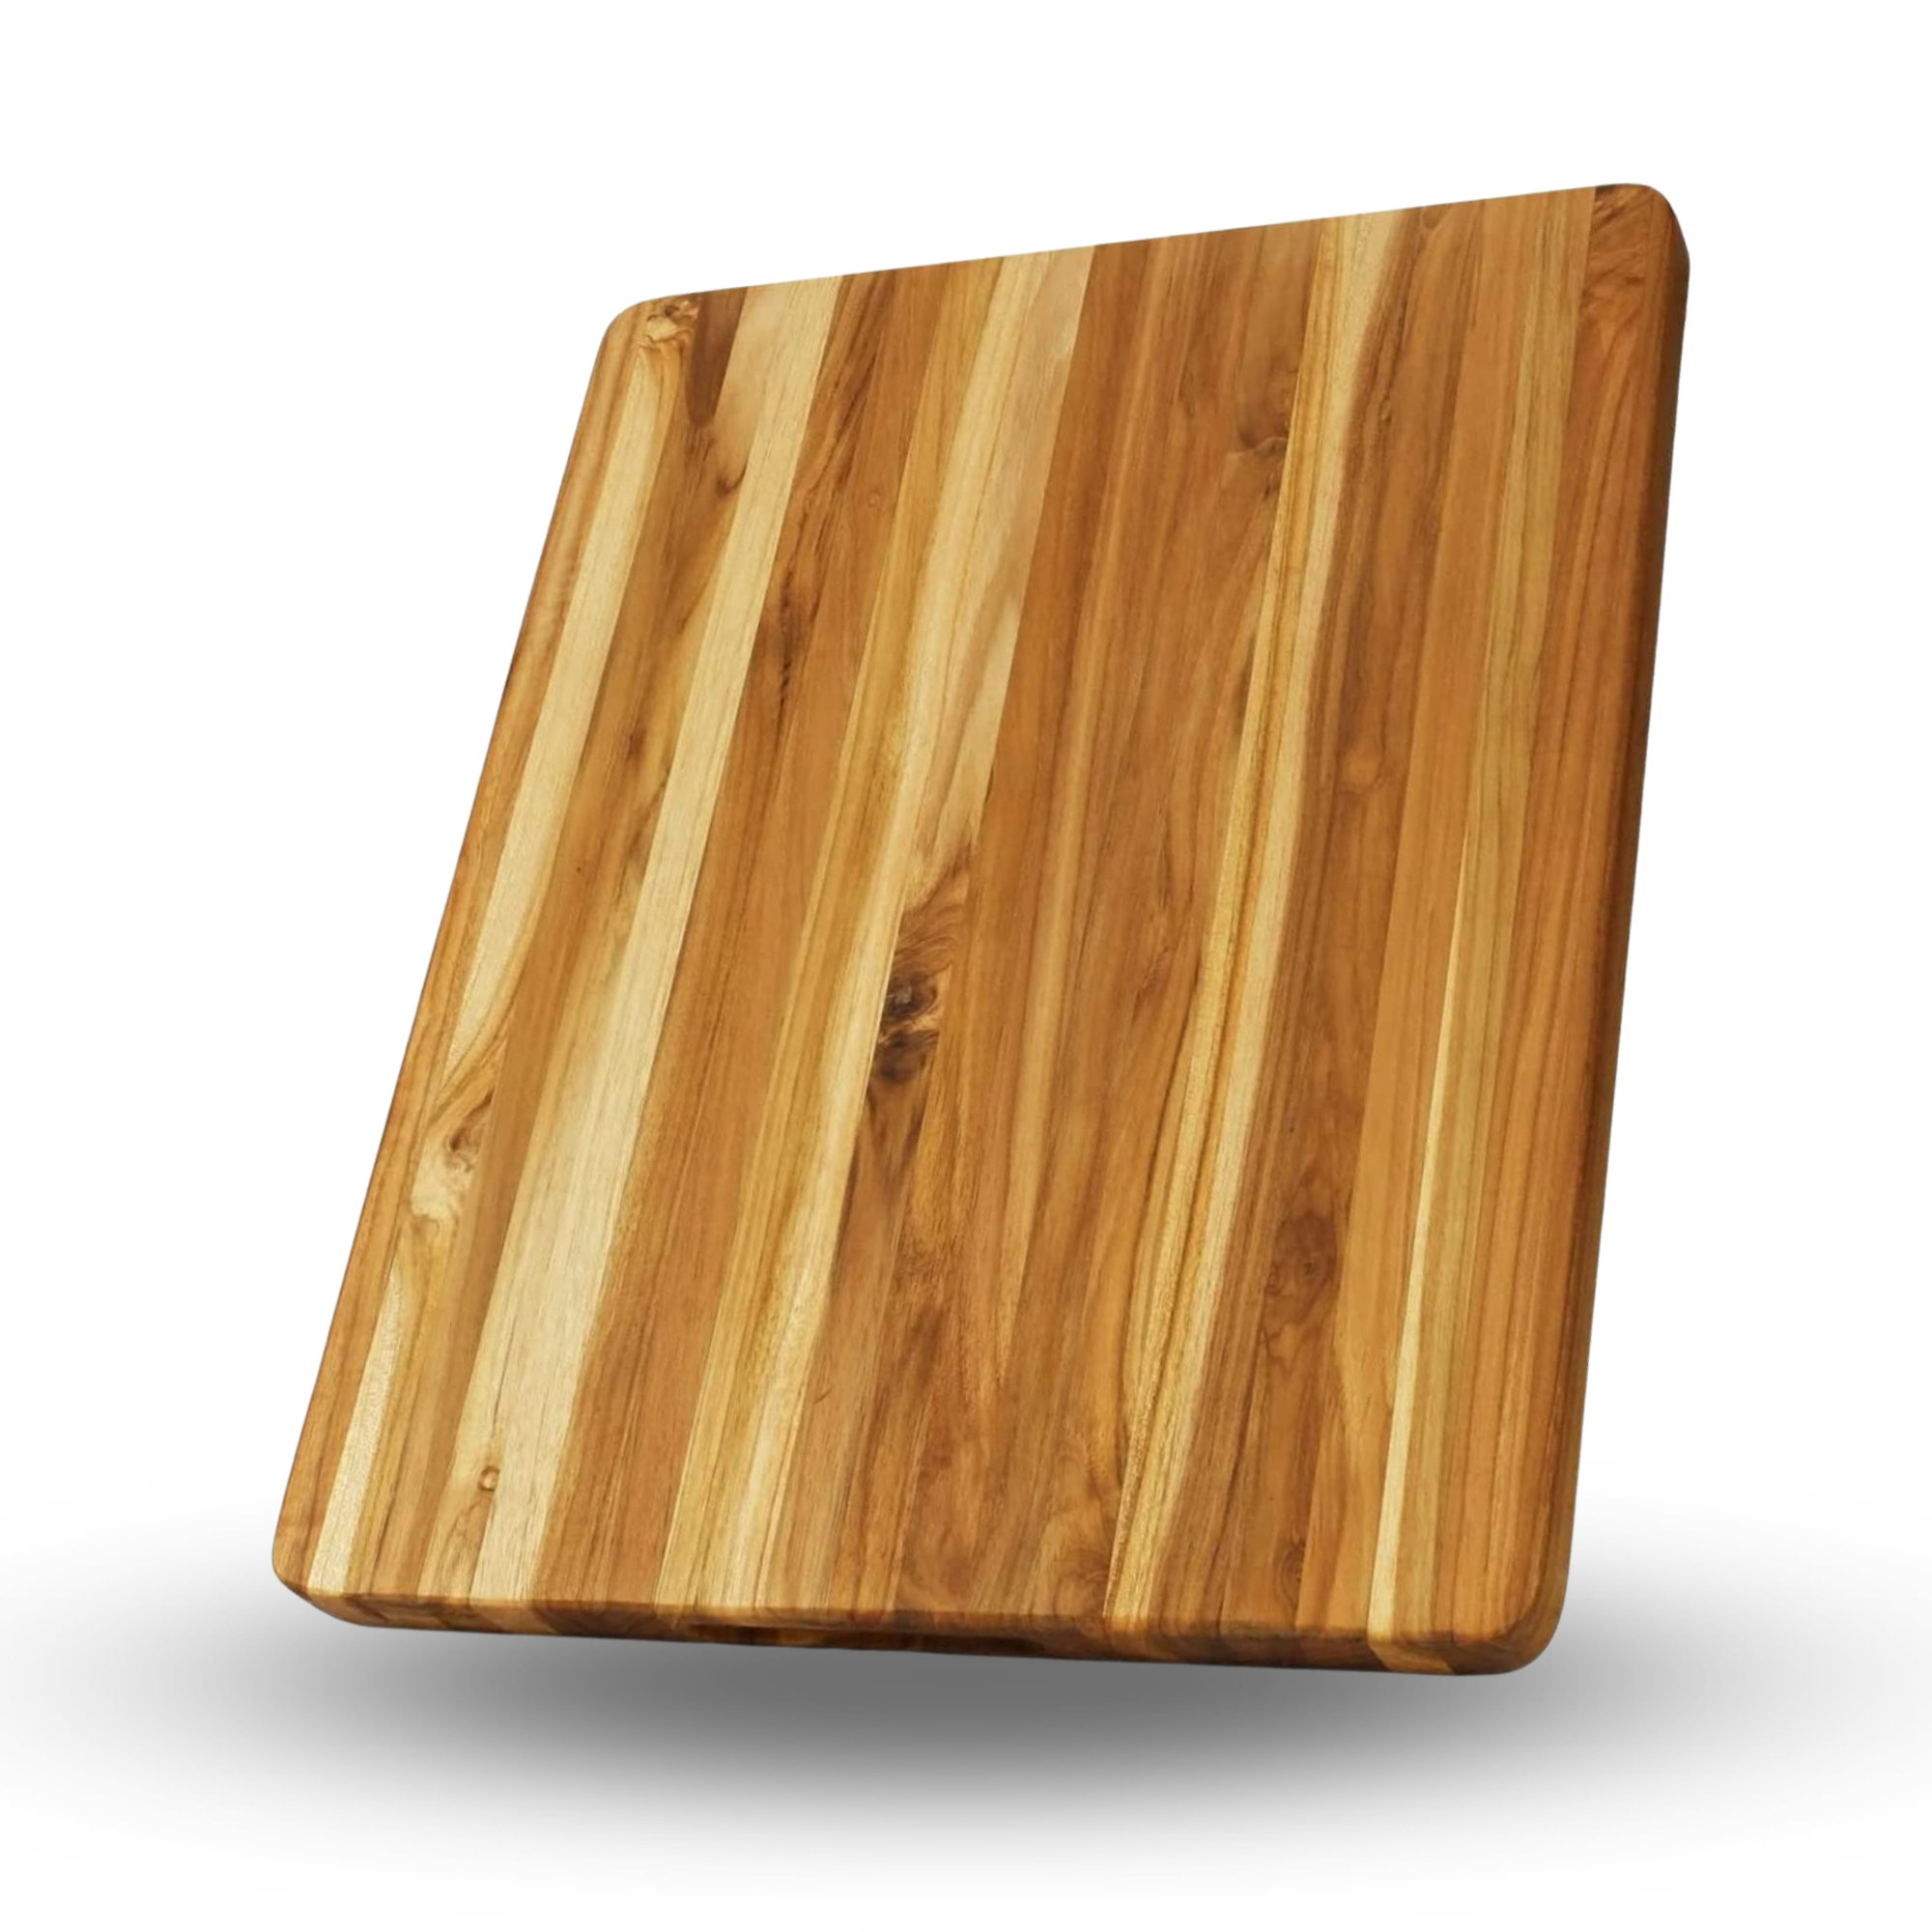 BEEFURNI Teak Wood Cutting Board with Juice Groove, Small Wooden Cutting  Boards for Kitchen, Hanging Chopping Board, Mothers Day Gifts, 1 Year